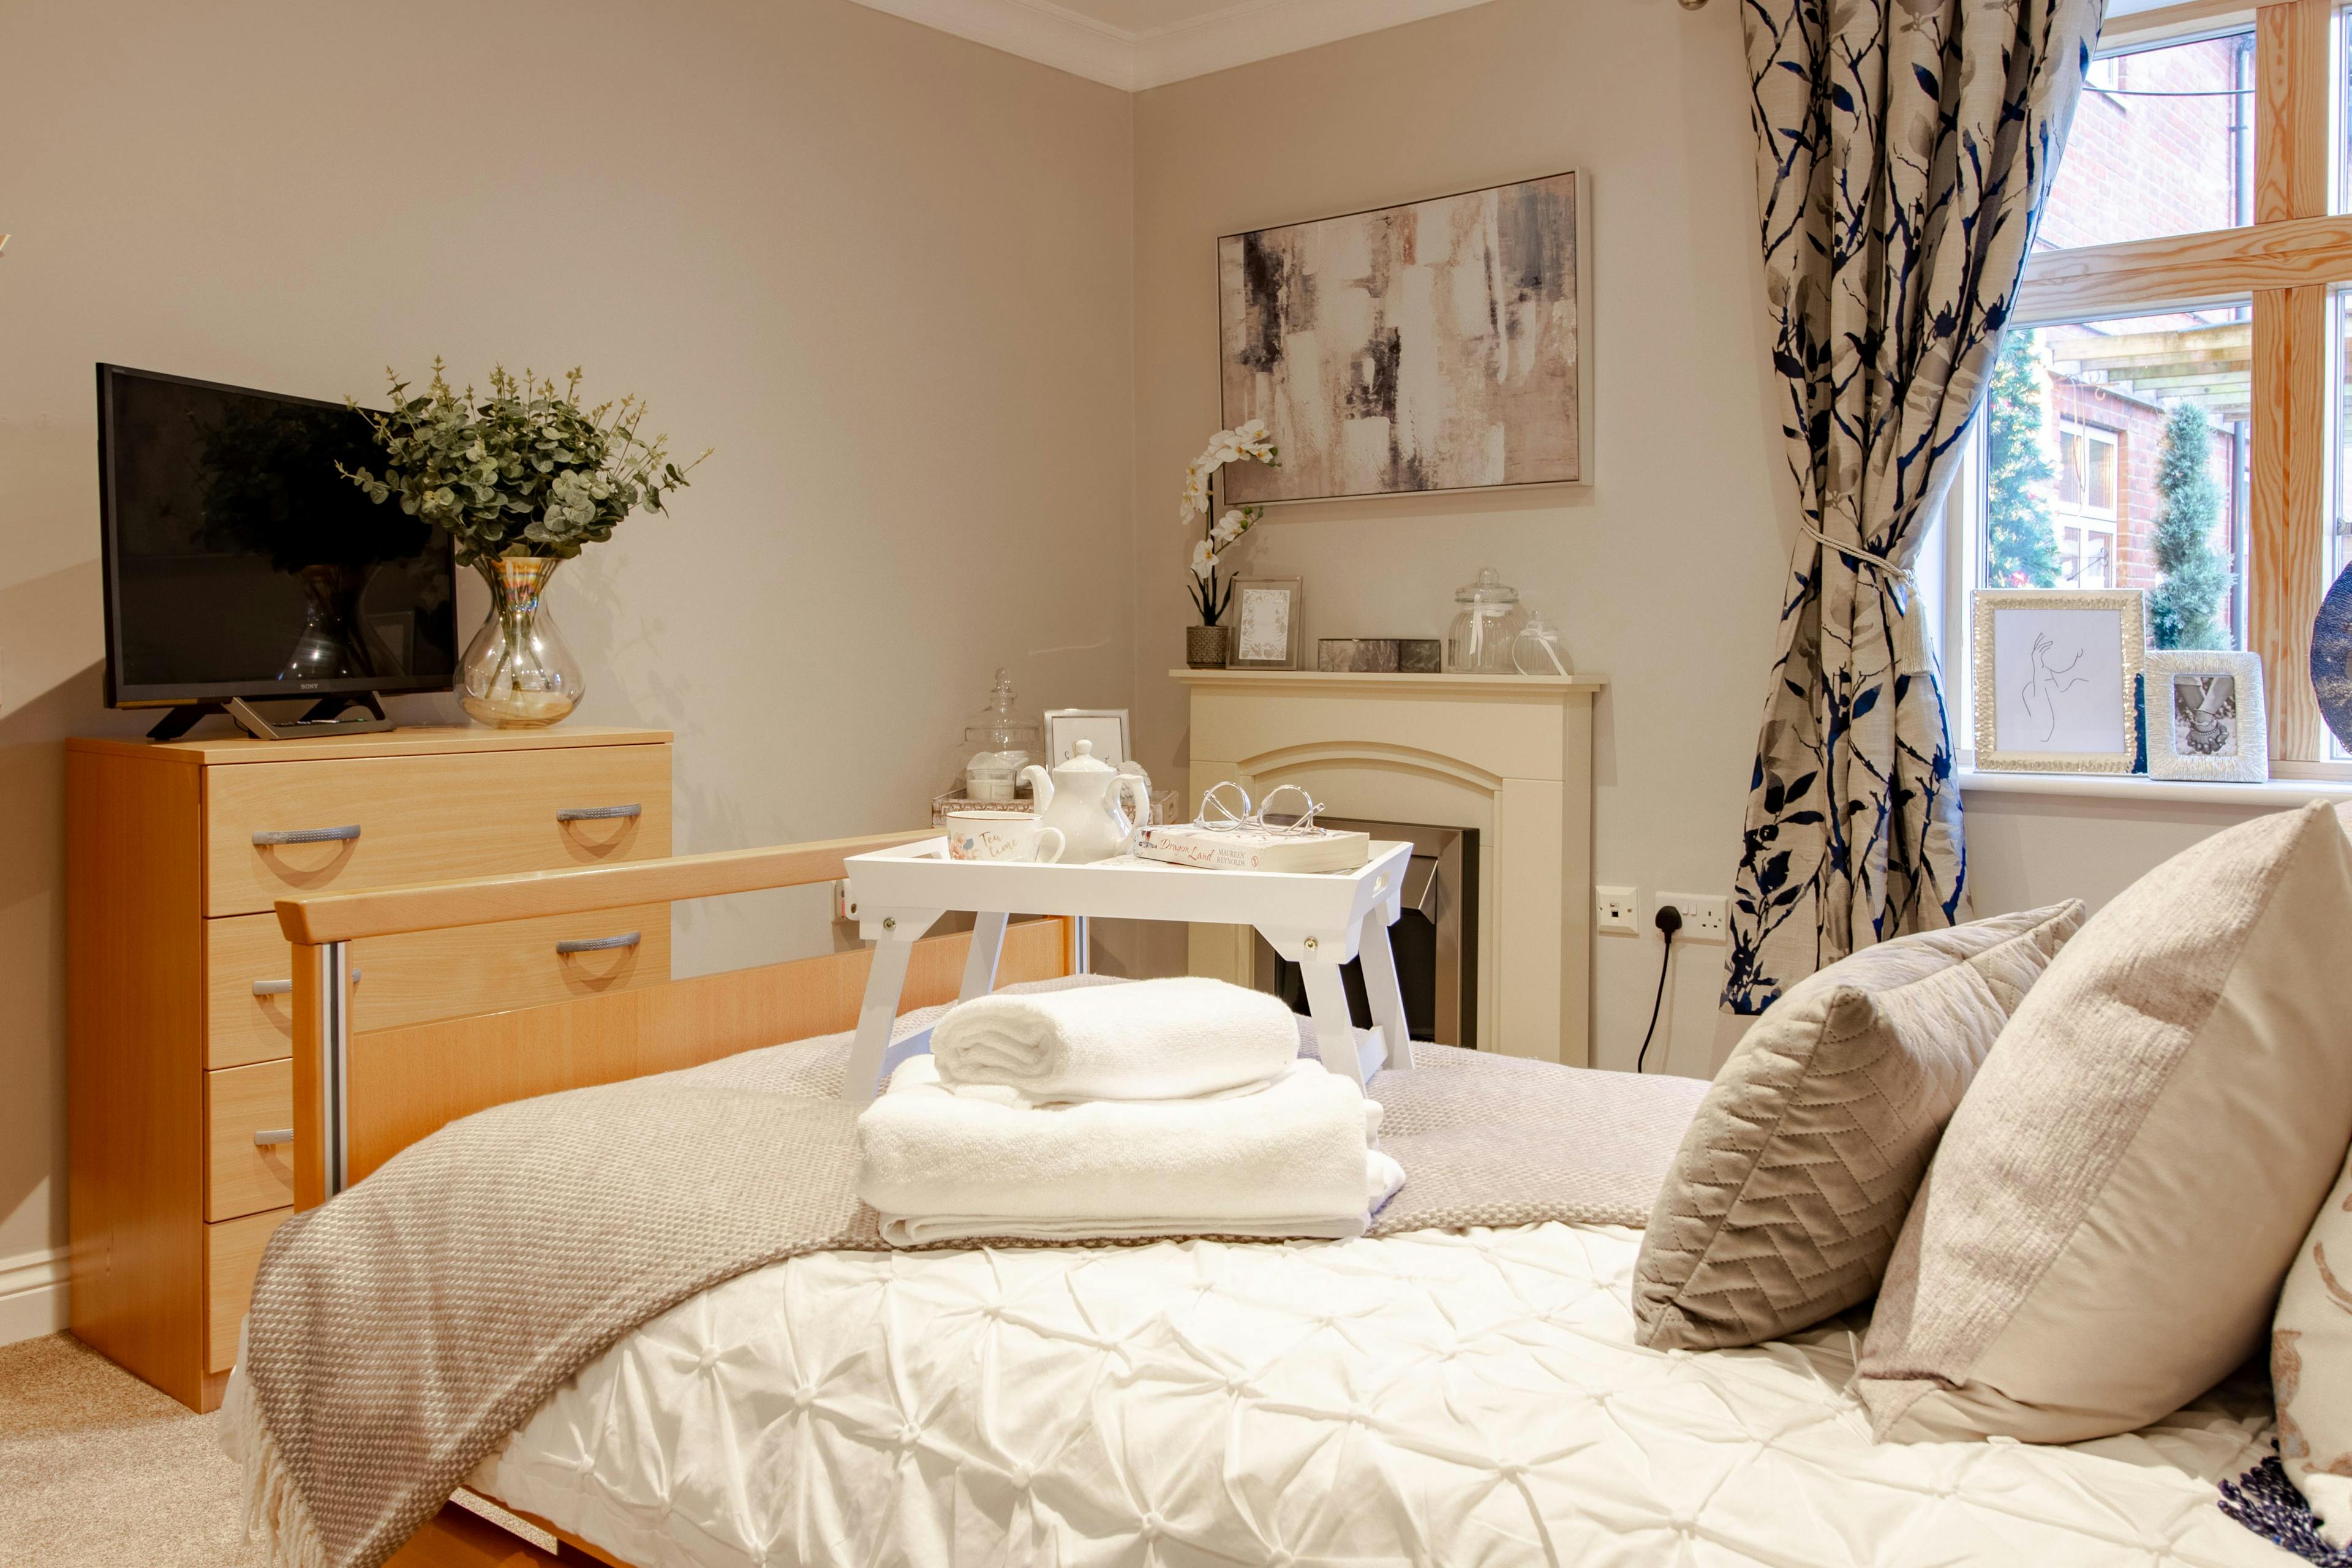 Bedroom at The Hollies Care Home in Dursley, Gloucestershire